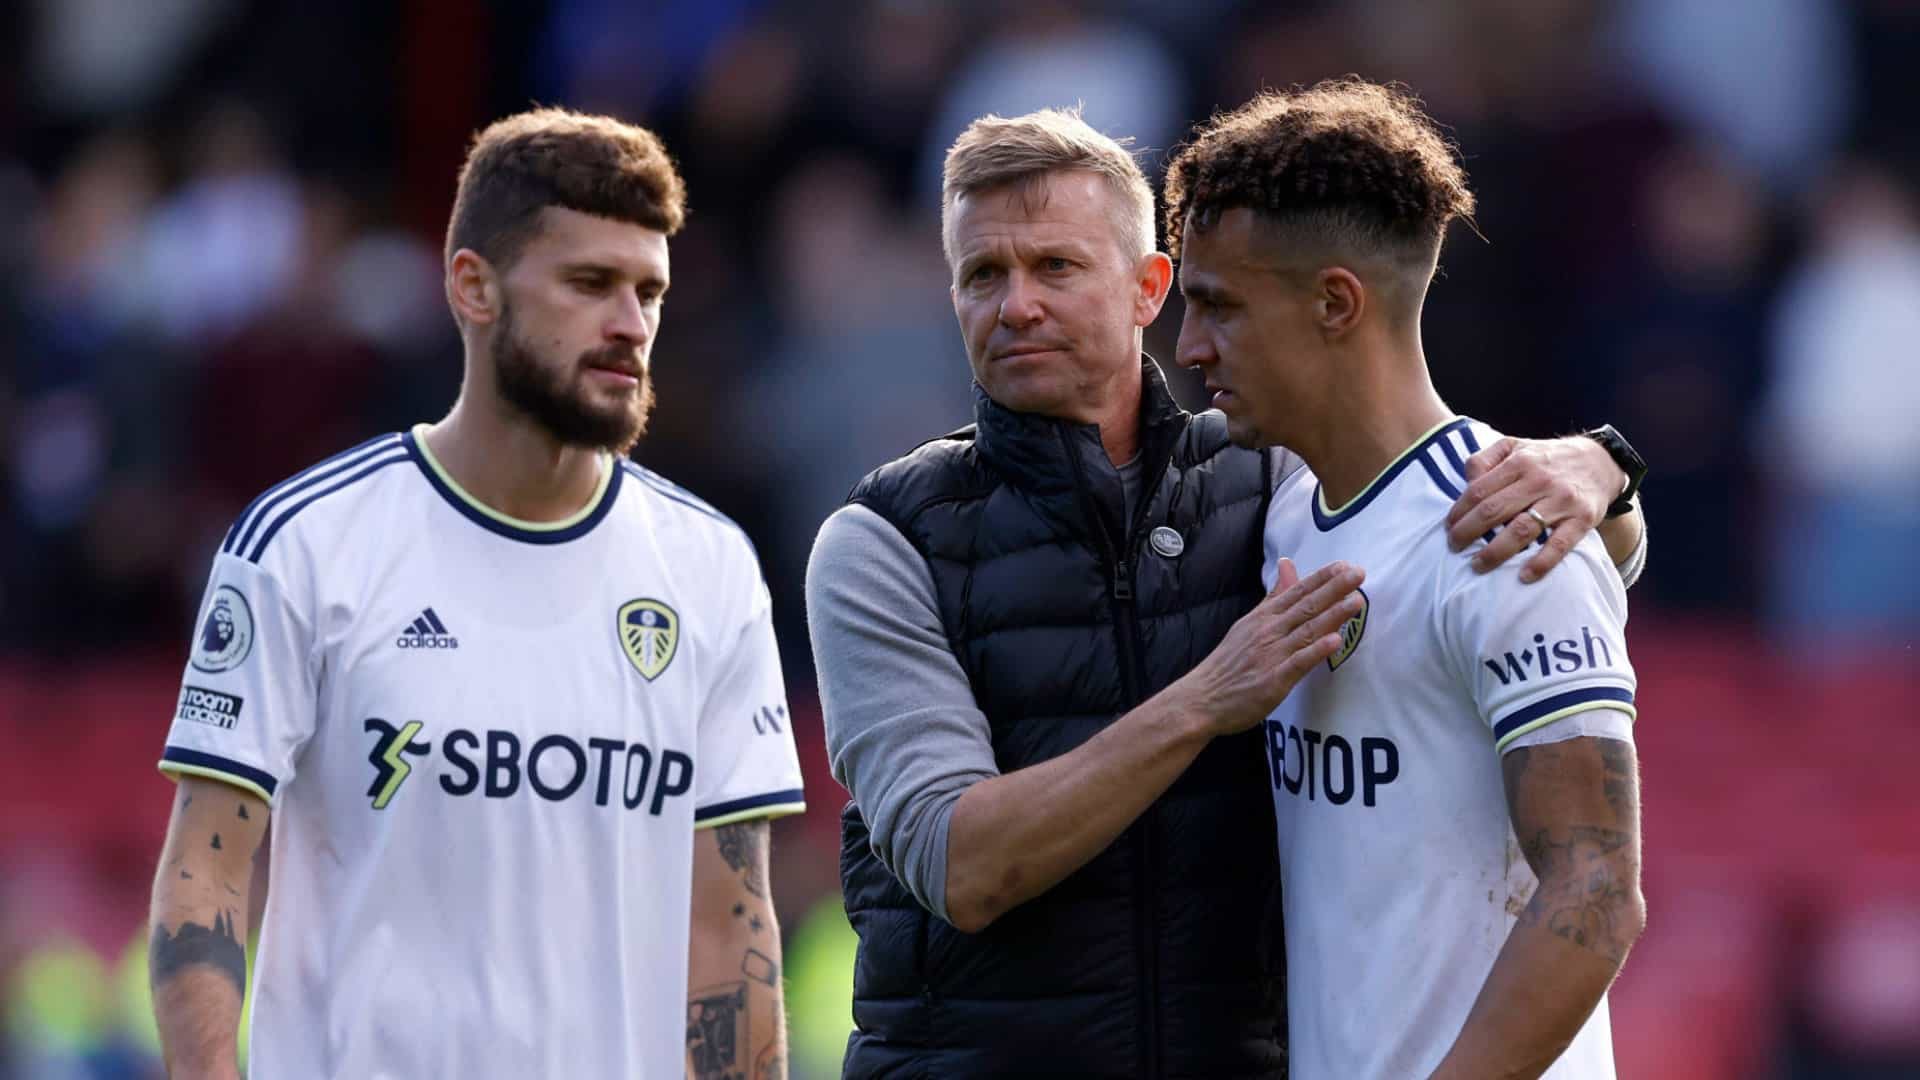 A photo of Jesse Marsch consolong Rodrigo while Mateusz Klich looks disappointed in the background